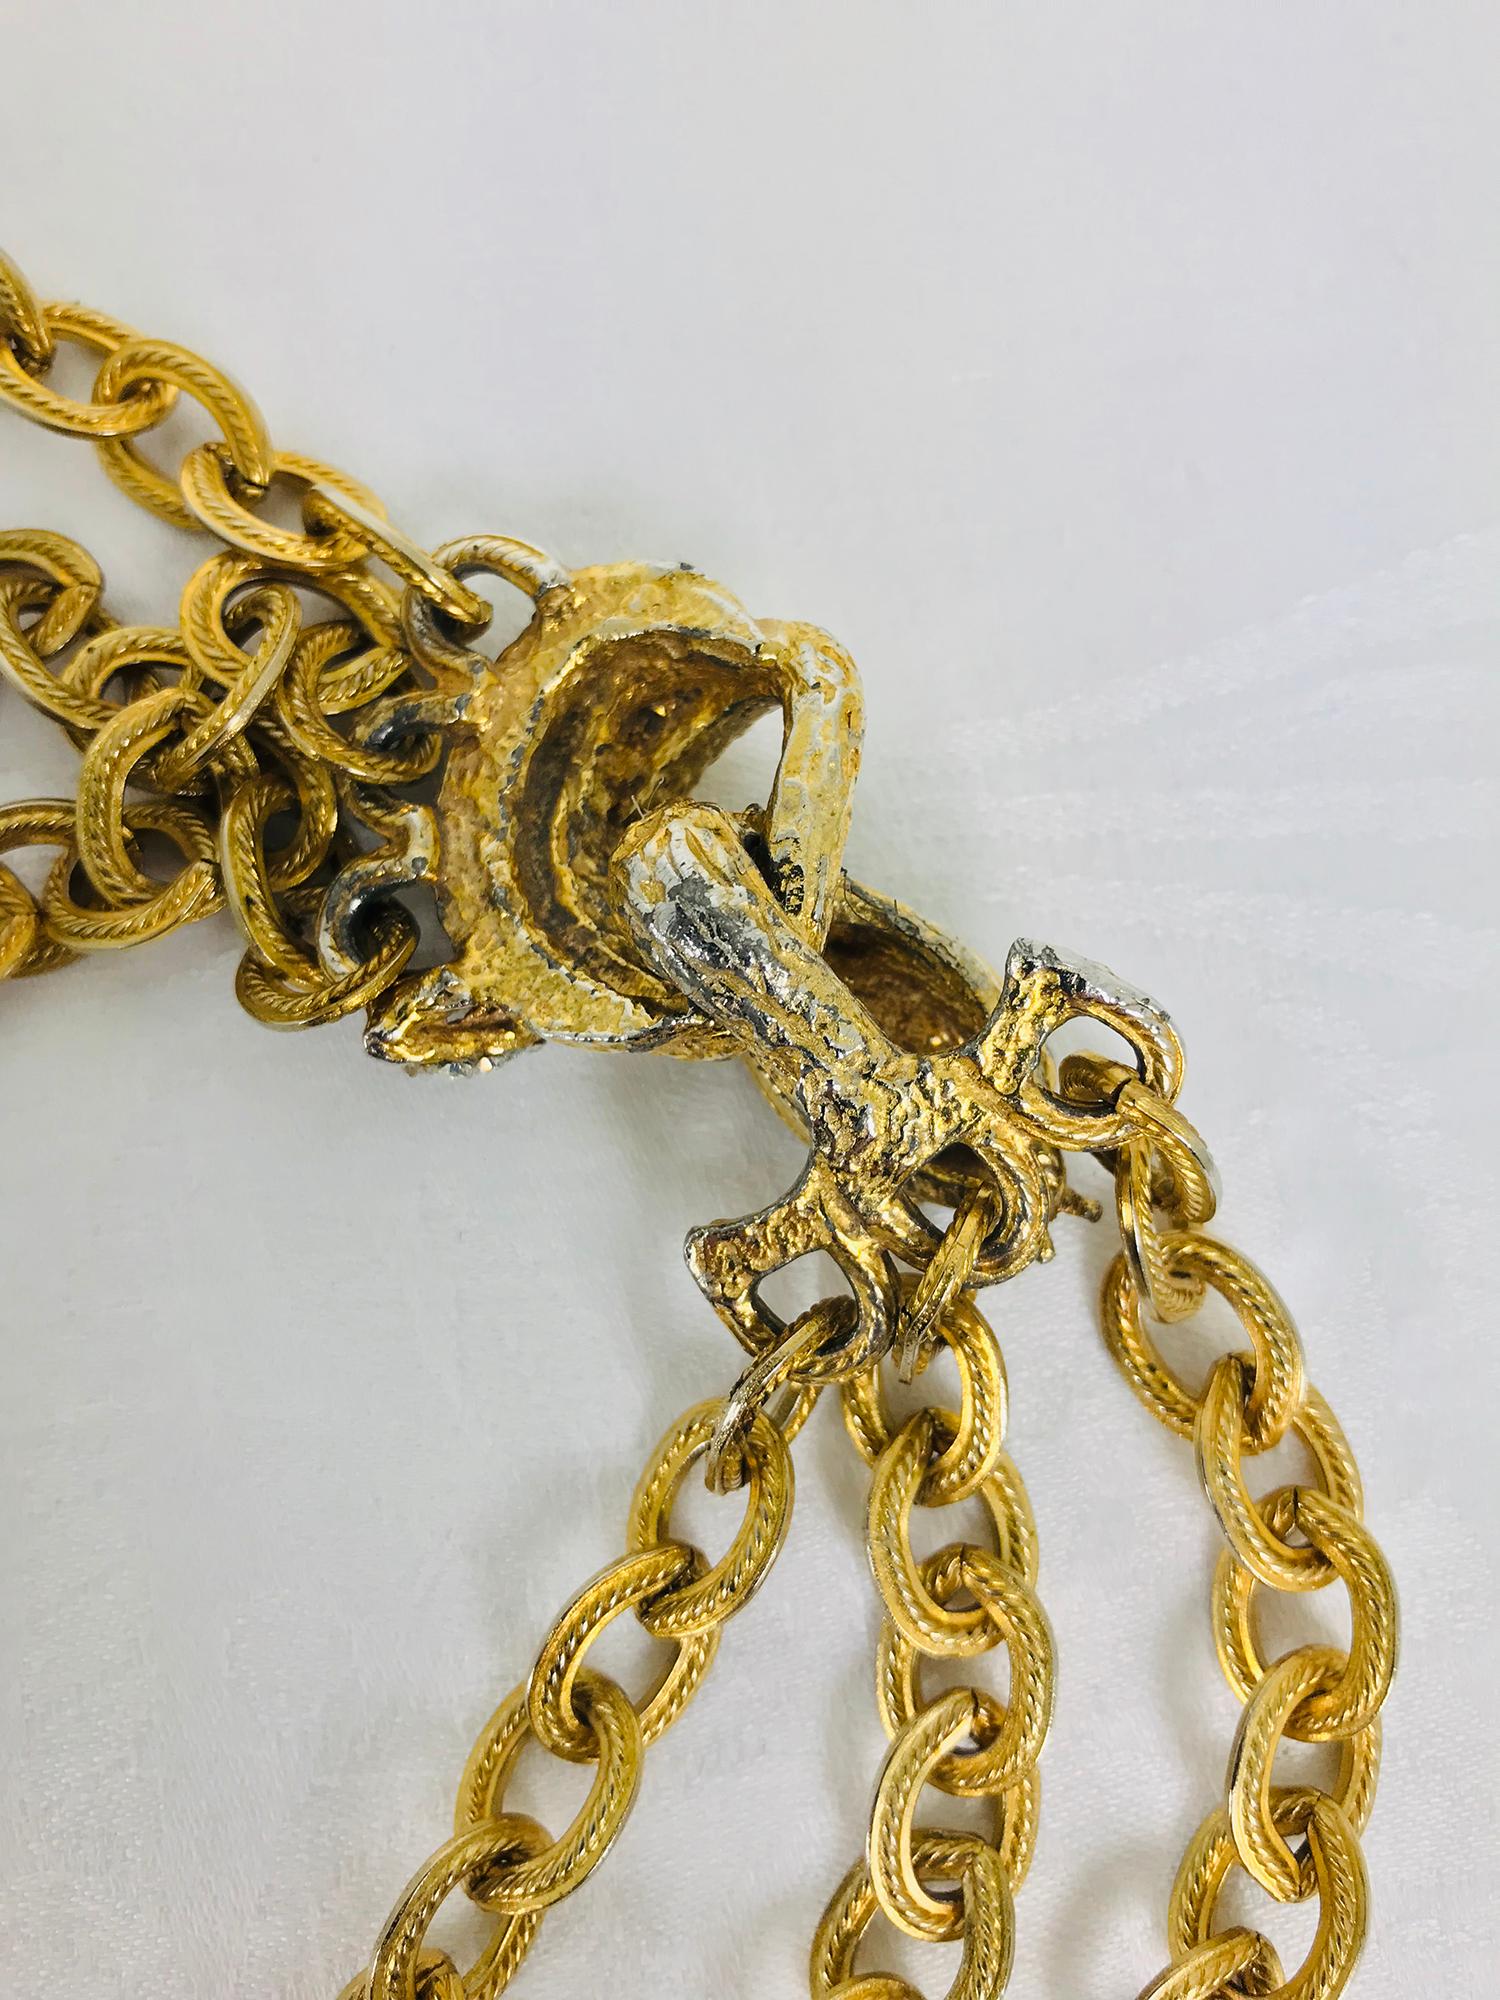 Snake Festoon Necklace in faux Gold and Rhinestone Vintage 3